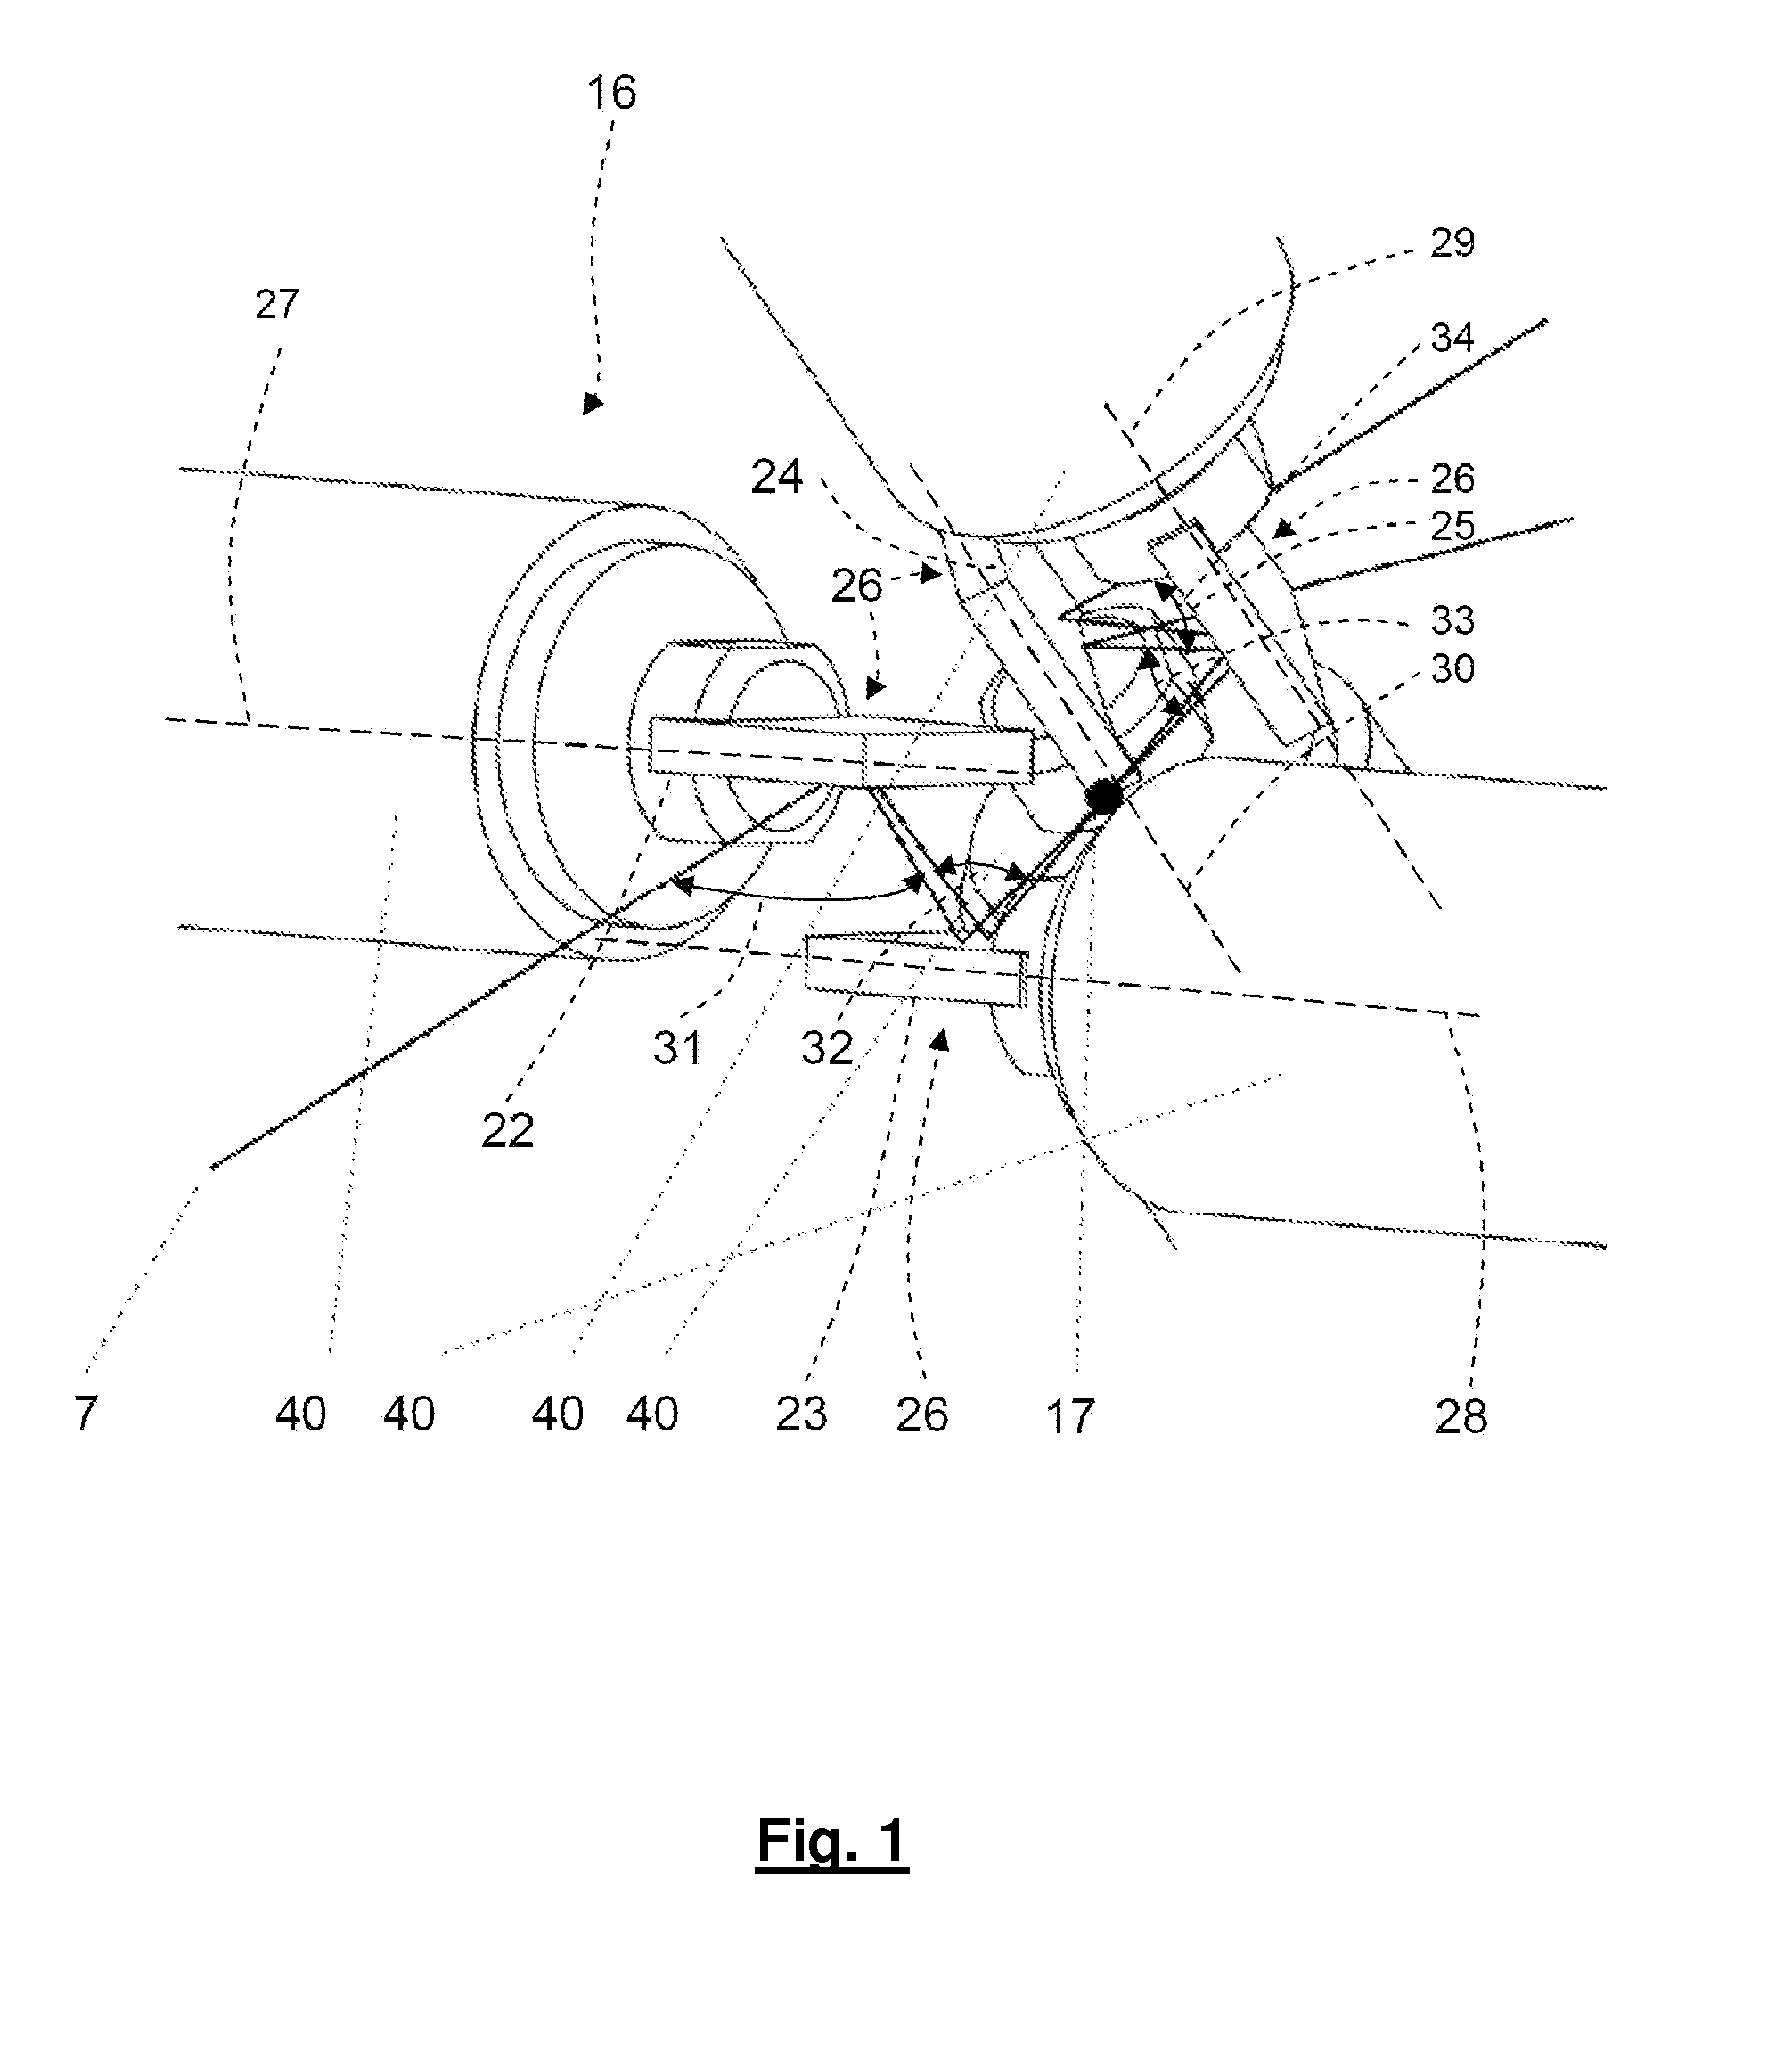 Method and Device for Dynamically Shifting a Light Beam with Regard to an Optic Focussing the Light Beam